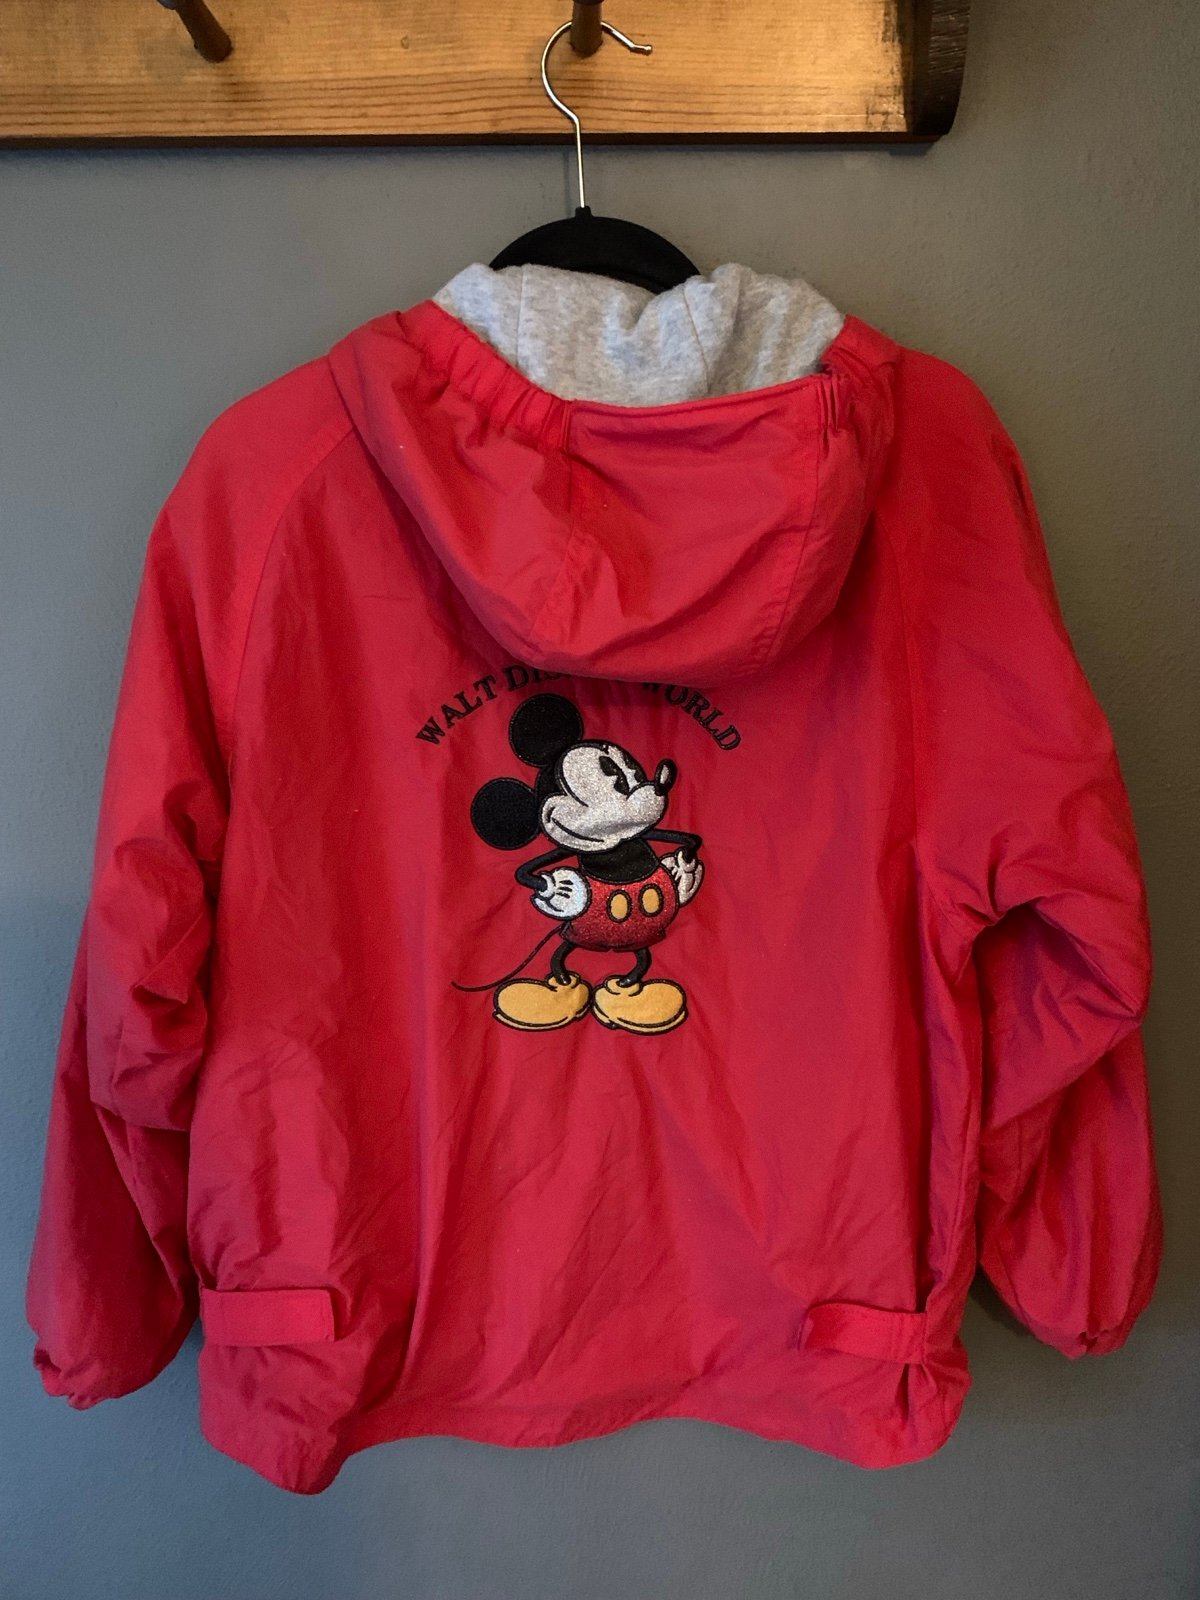 Vintage Disney World Parks Glitter Mickey Mouse Women’s Small Red Embroidered jKIL57en7